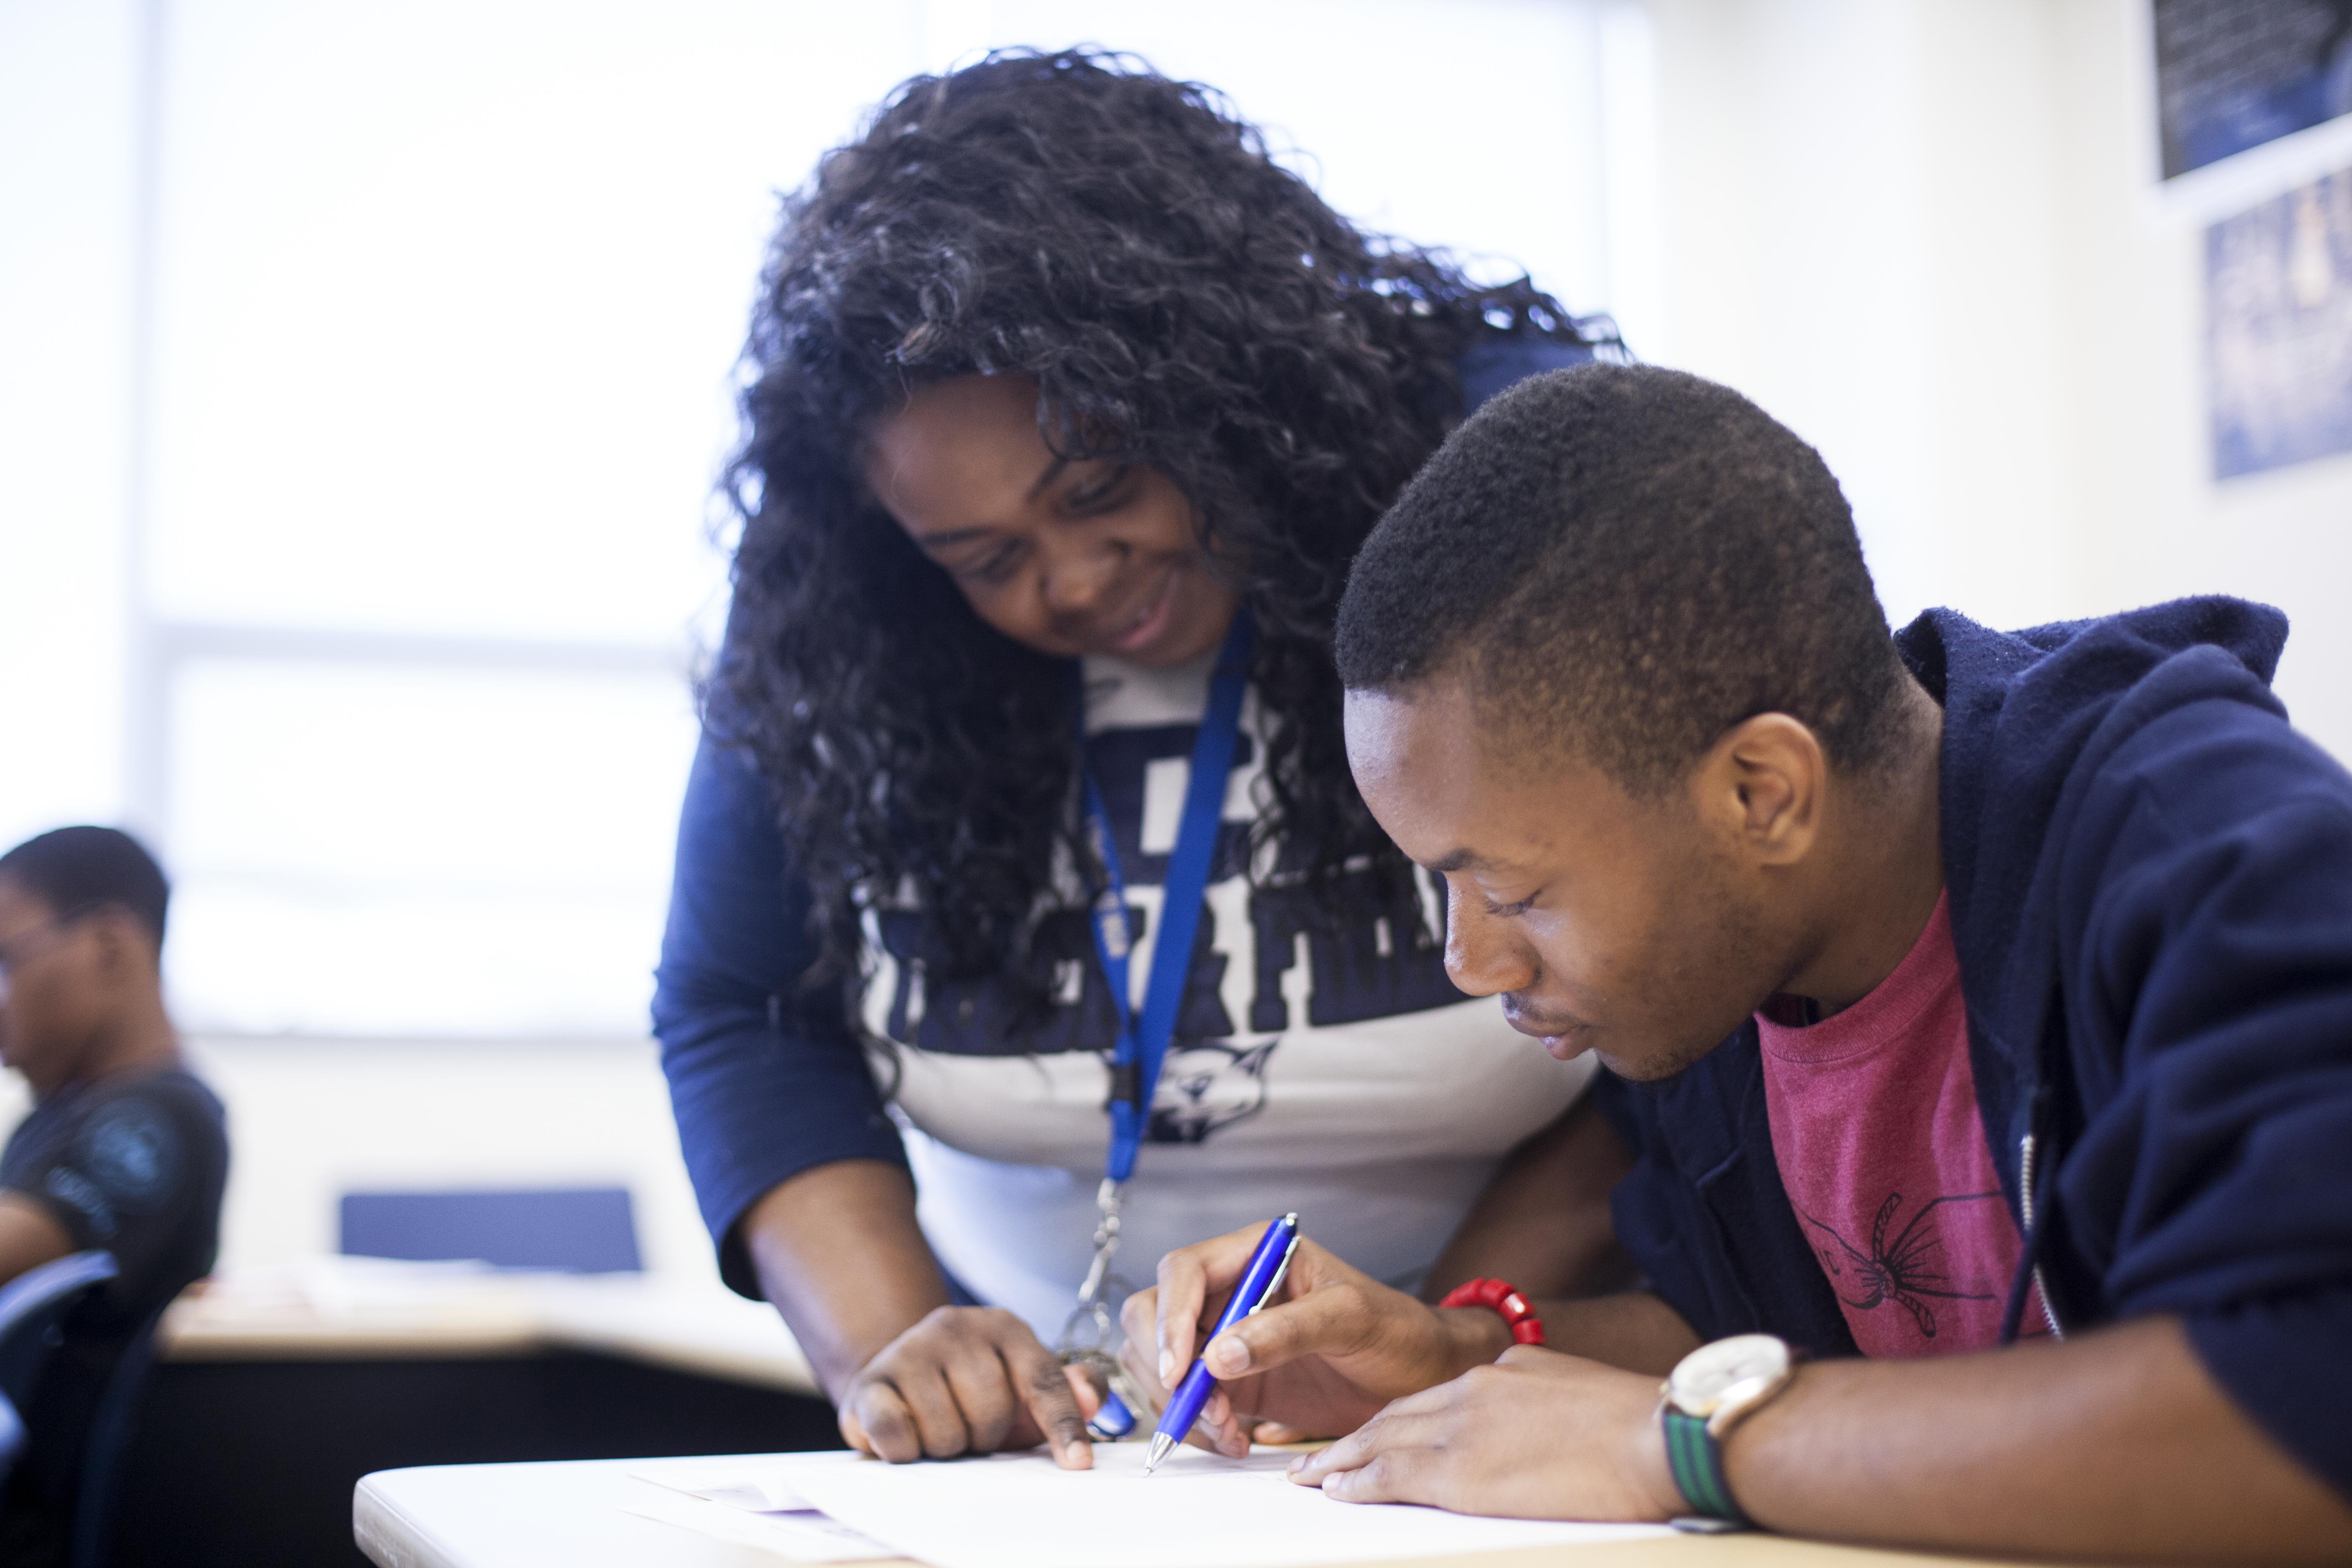 Photo shows a teacher helping a student with a task.